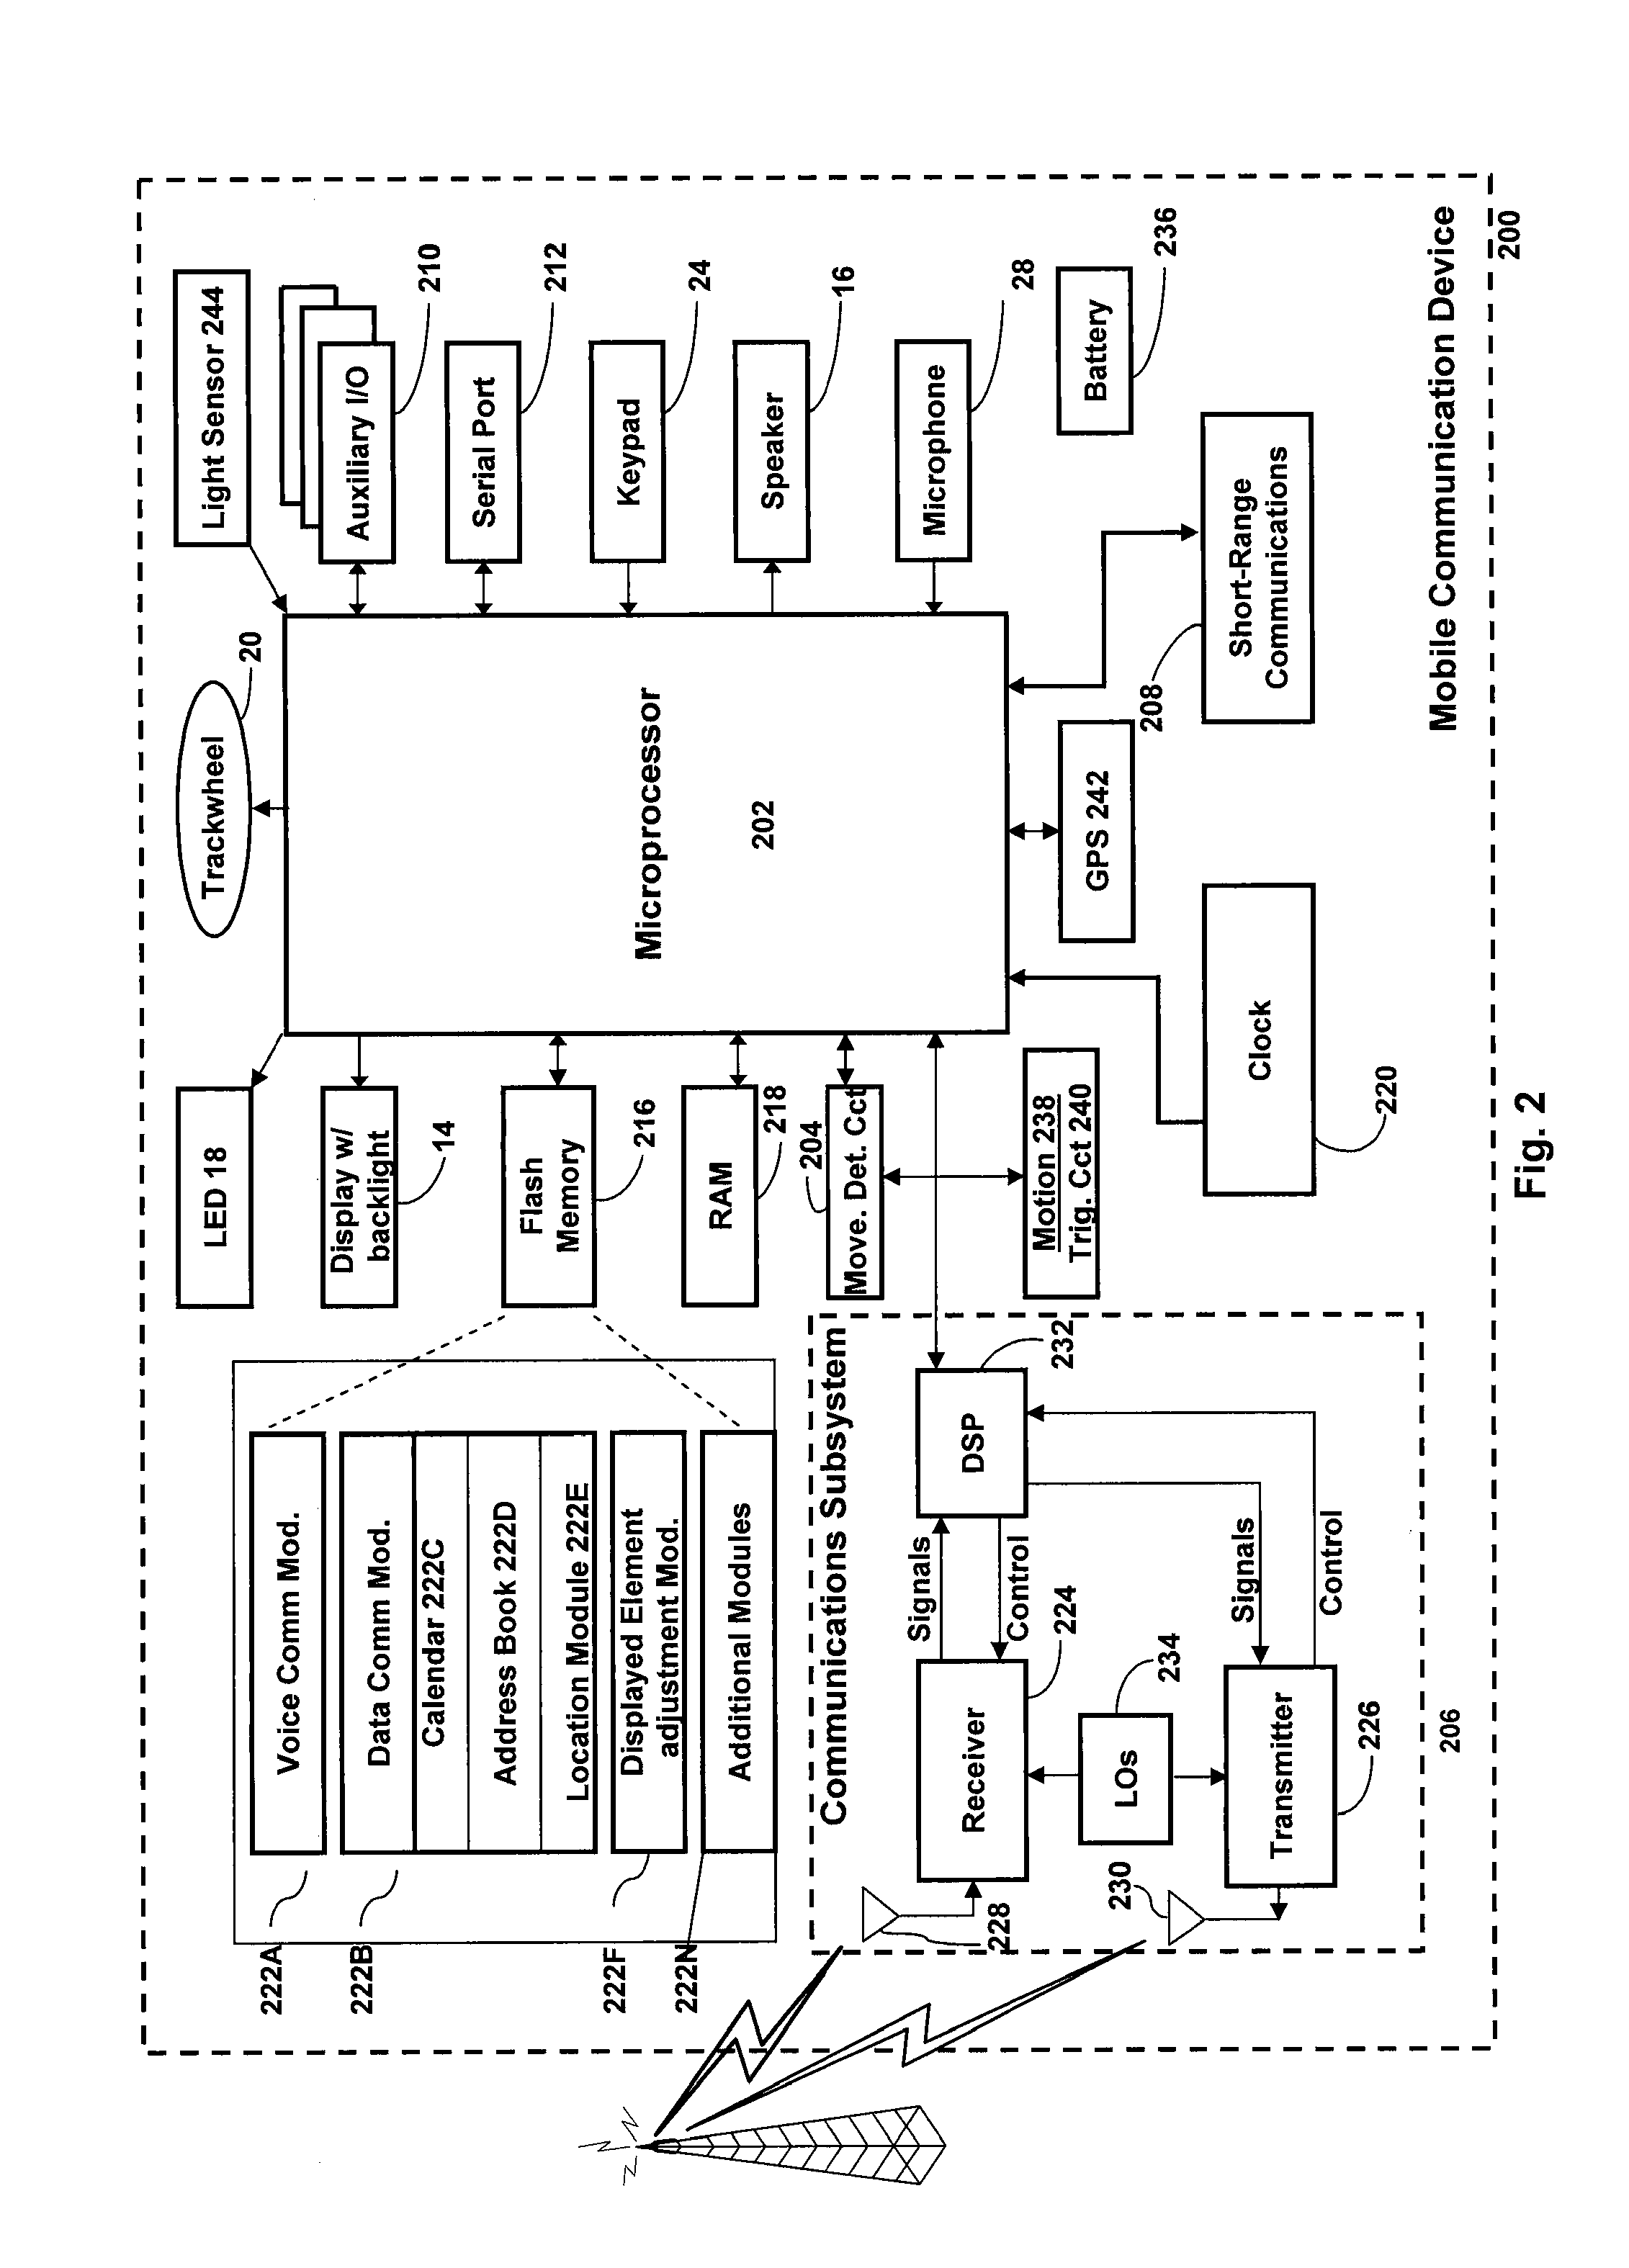 System and method for adjusting icons, text and images on an electronic device